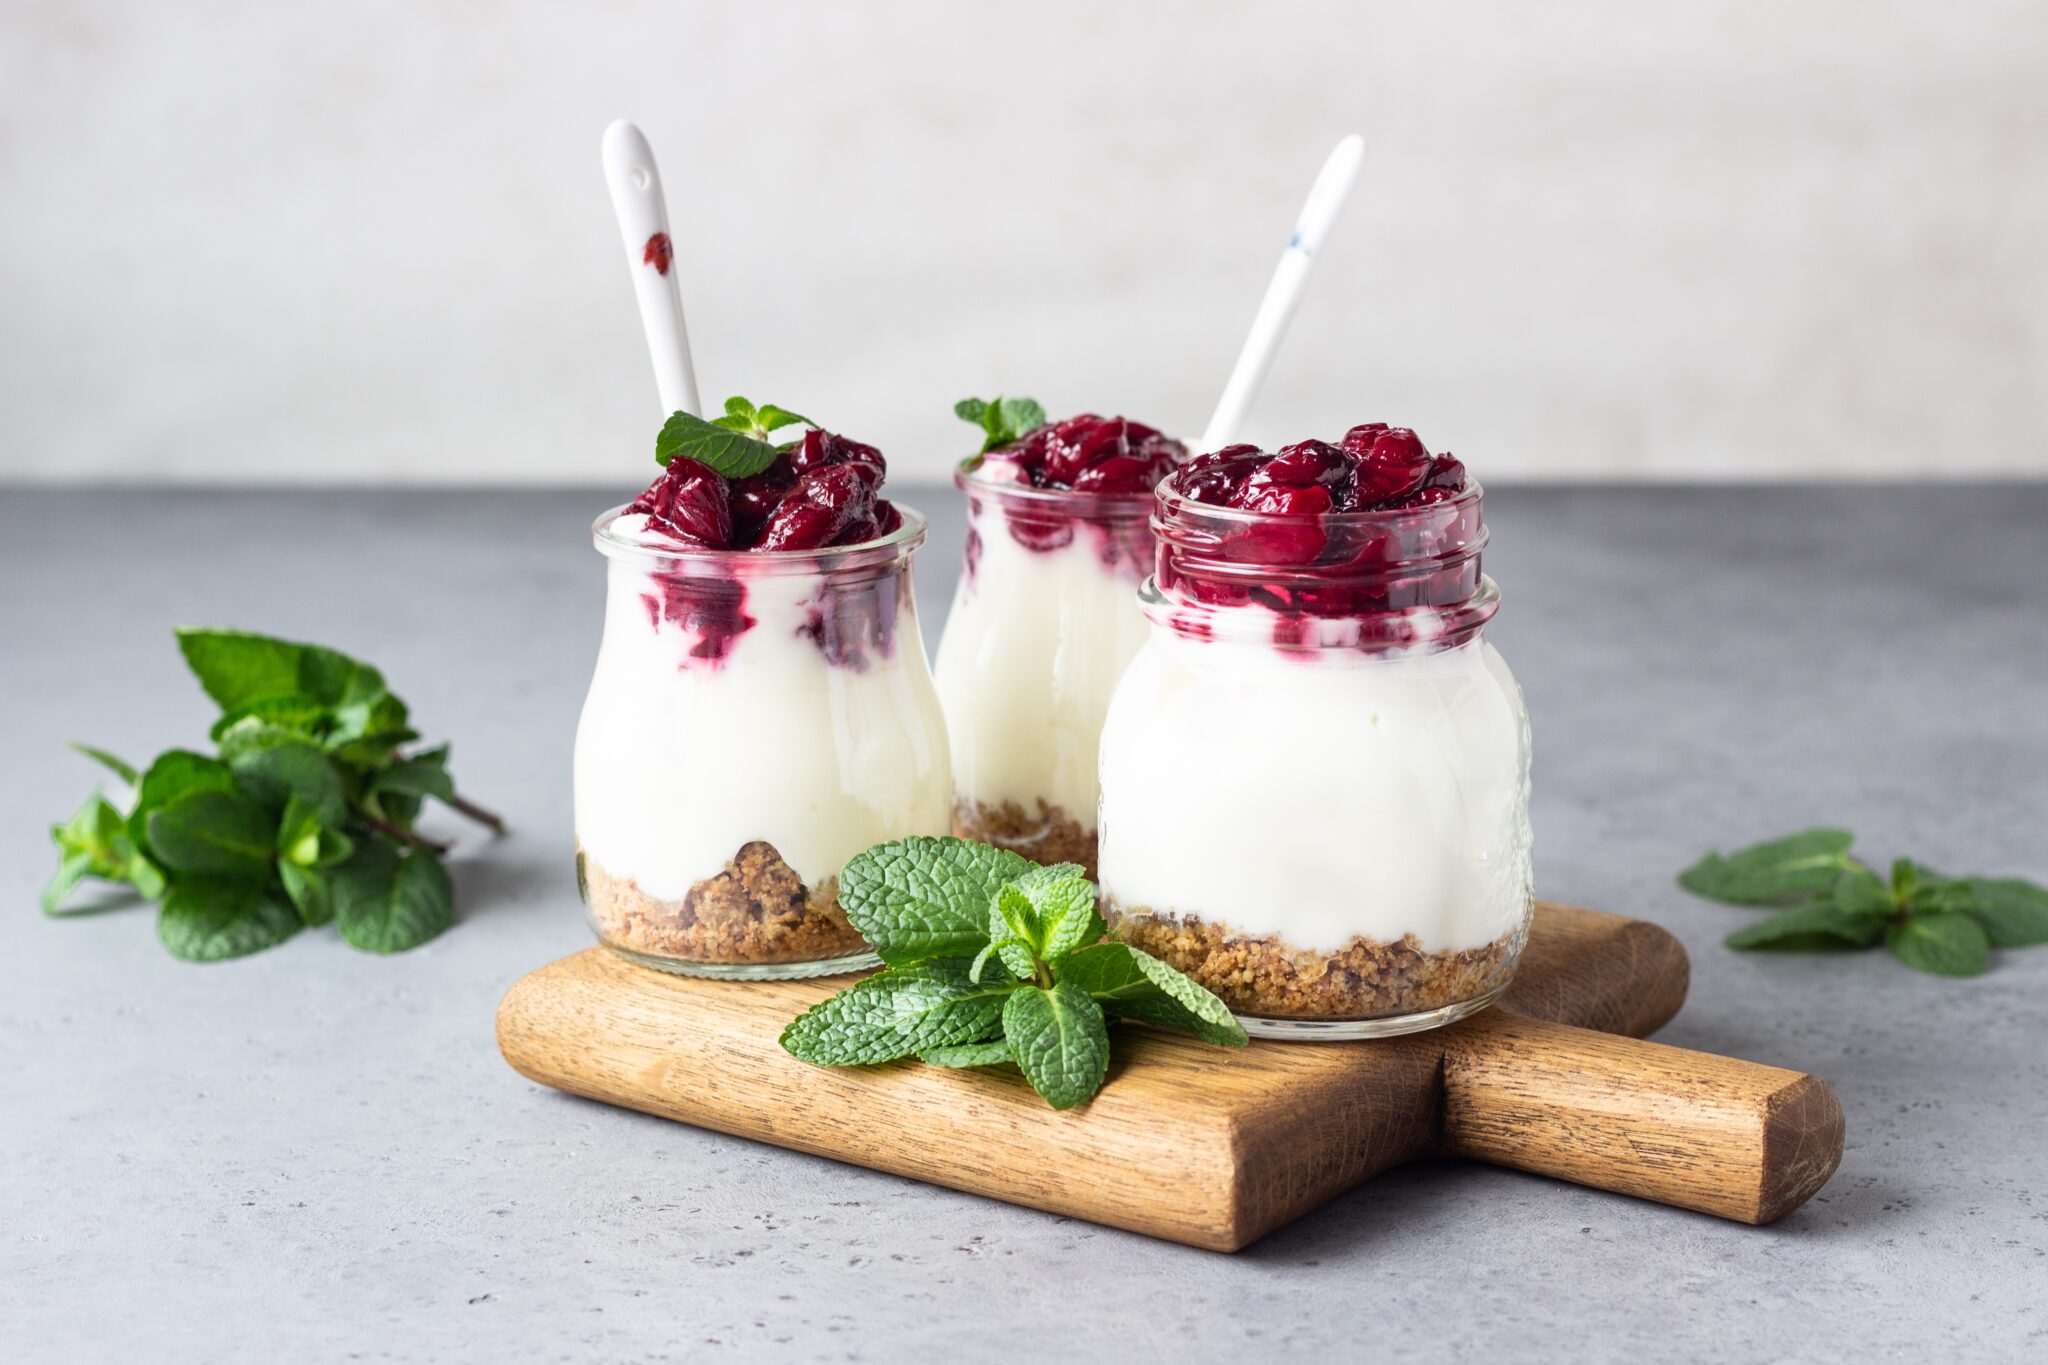 Healthy,Dessert,Of,Natural,Yogurt,,Cookies,And,Cherries,Served,With